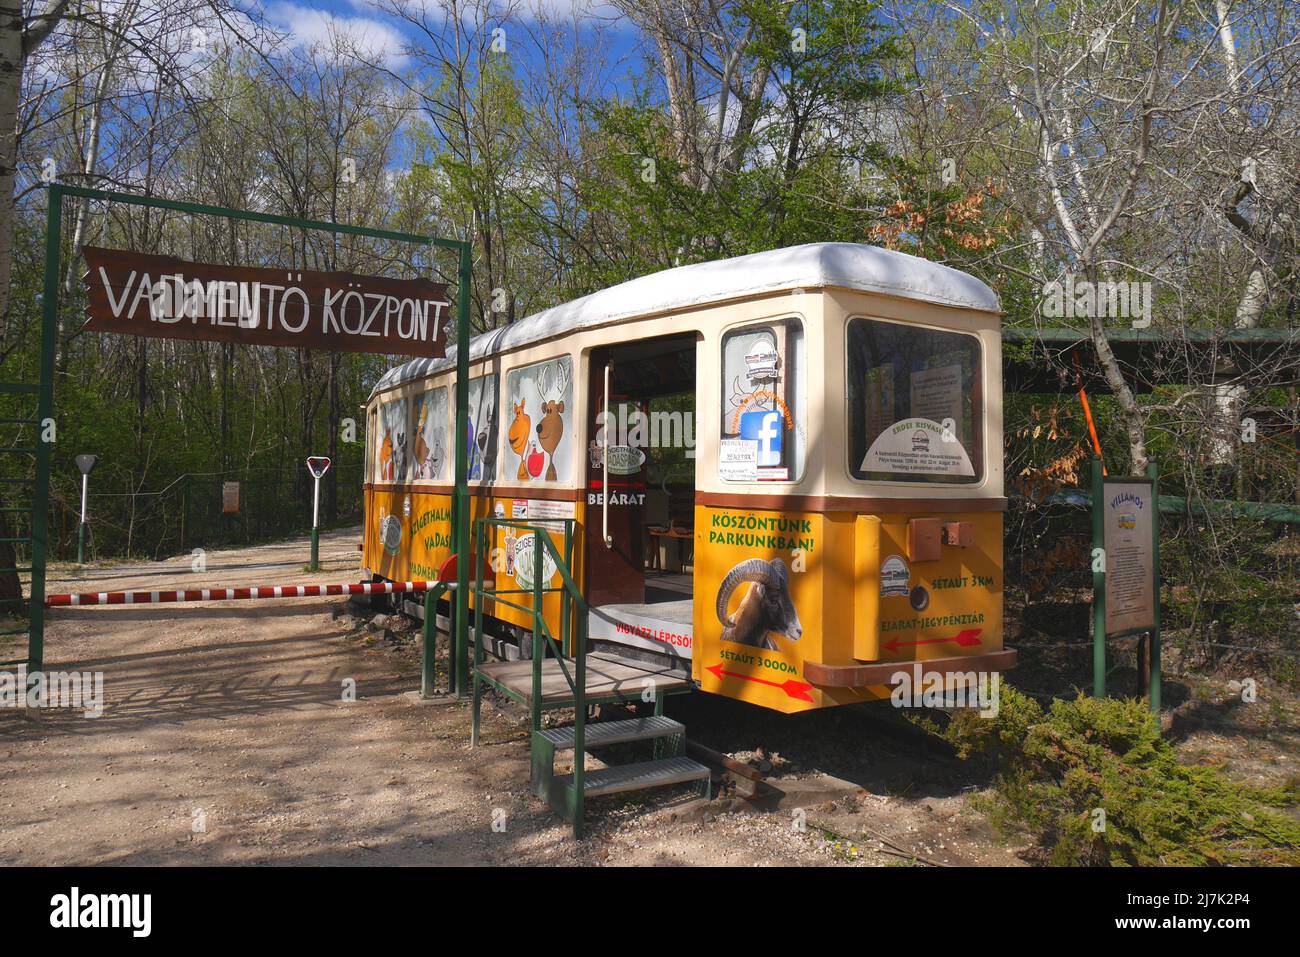 Old Budapest tram used as a static display and as an entrance to a nature walk, Szigethalom Vadaspark, Hungary Stock Photo